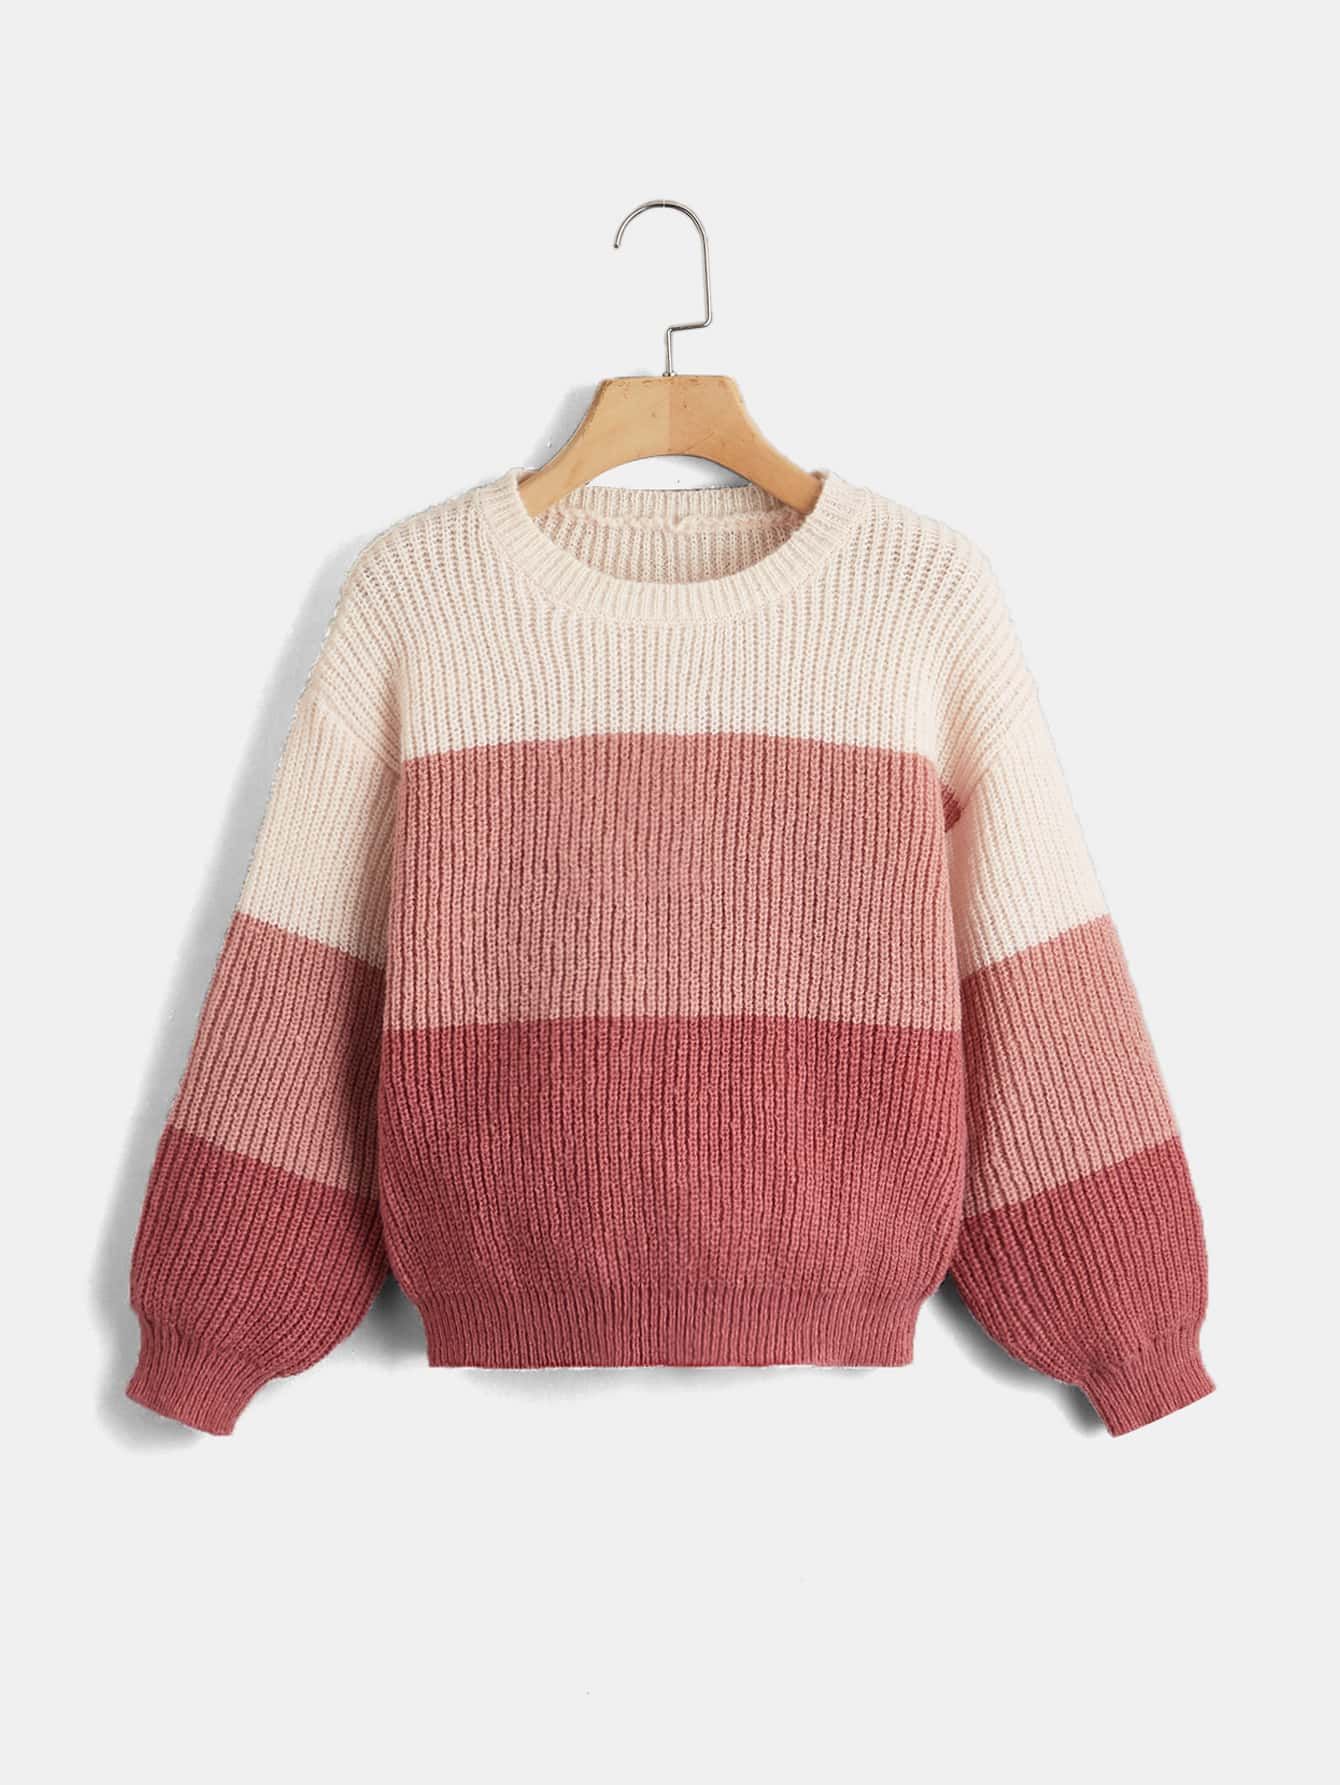 Winter Chic: Stay Cozy with Woolen Tops